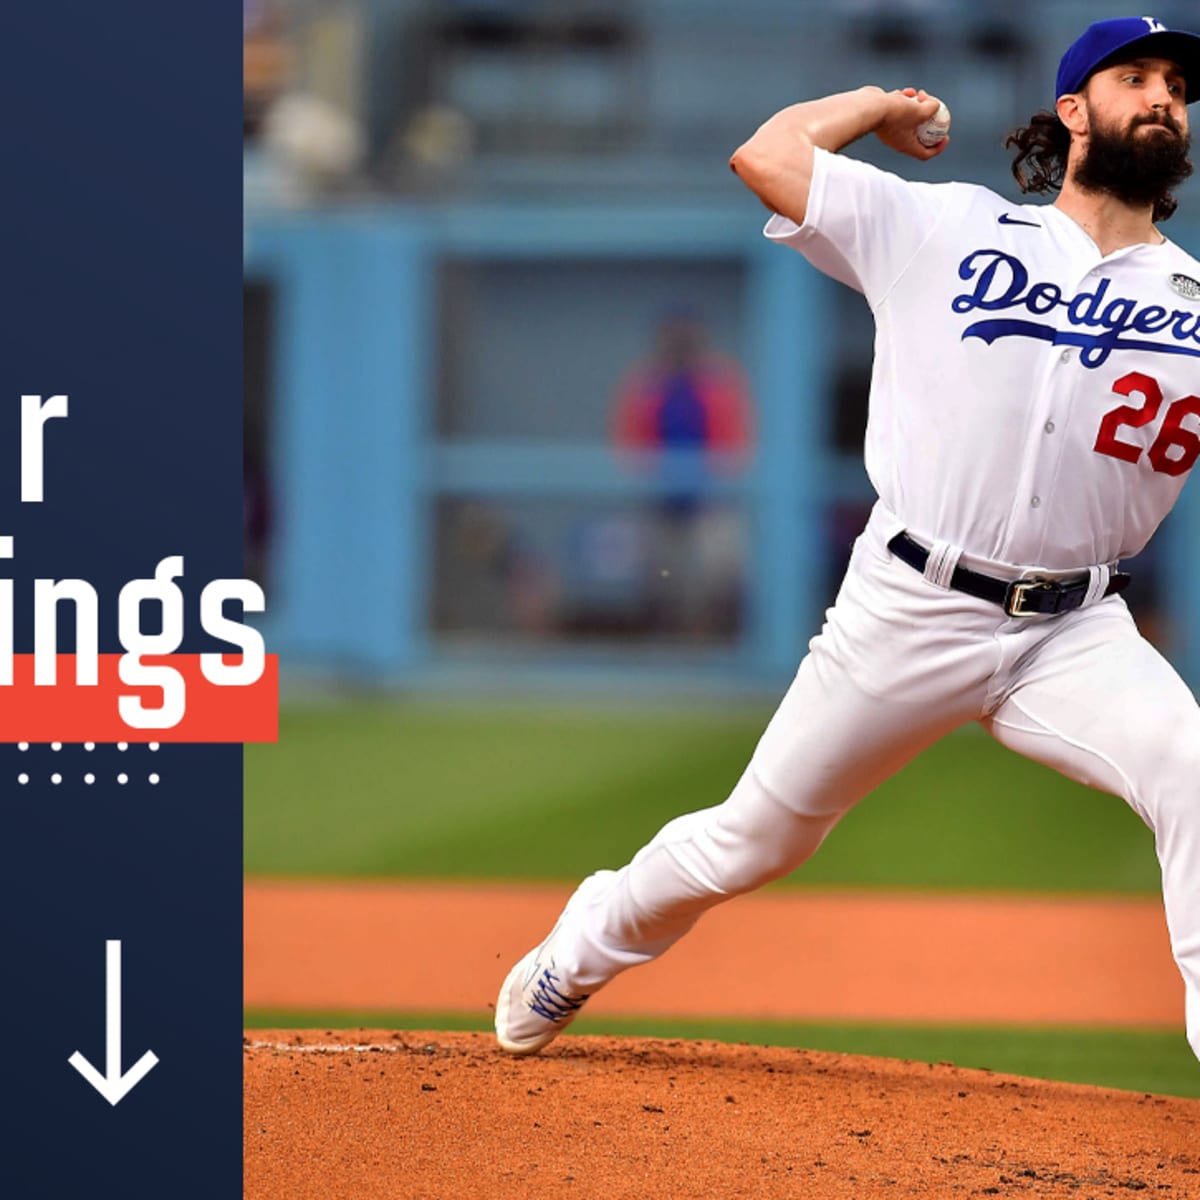 Eighth Starting Pitcher Power Rankings of 2023